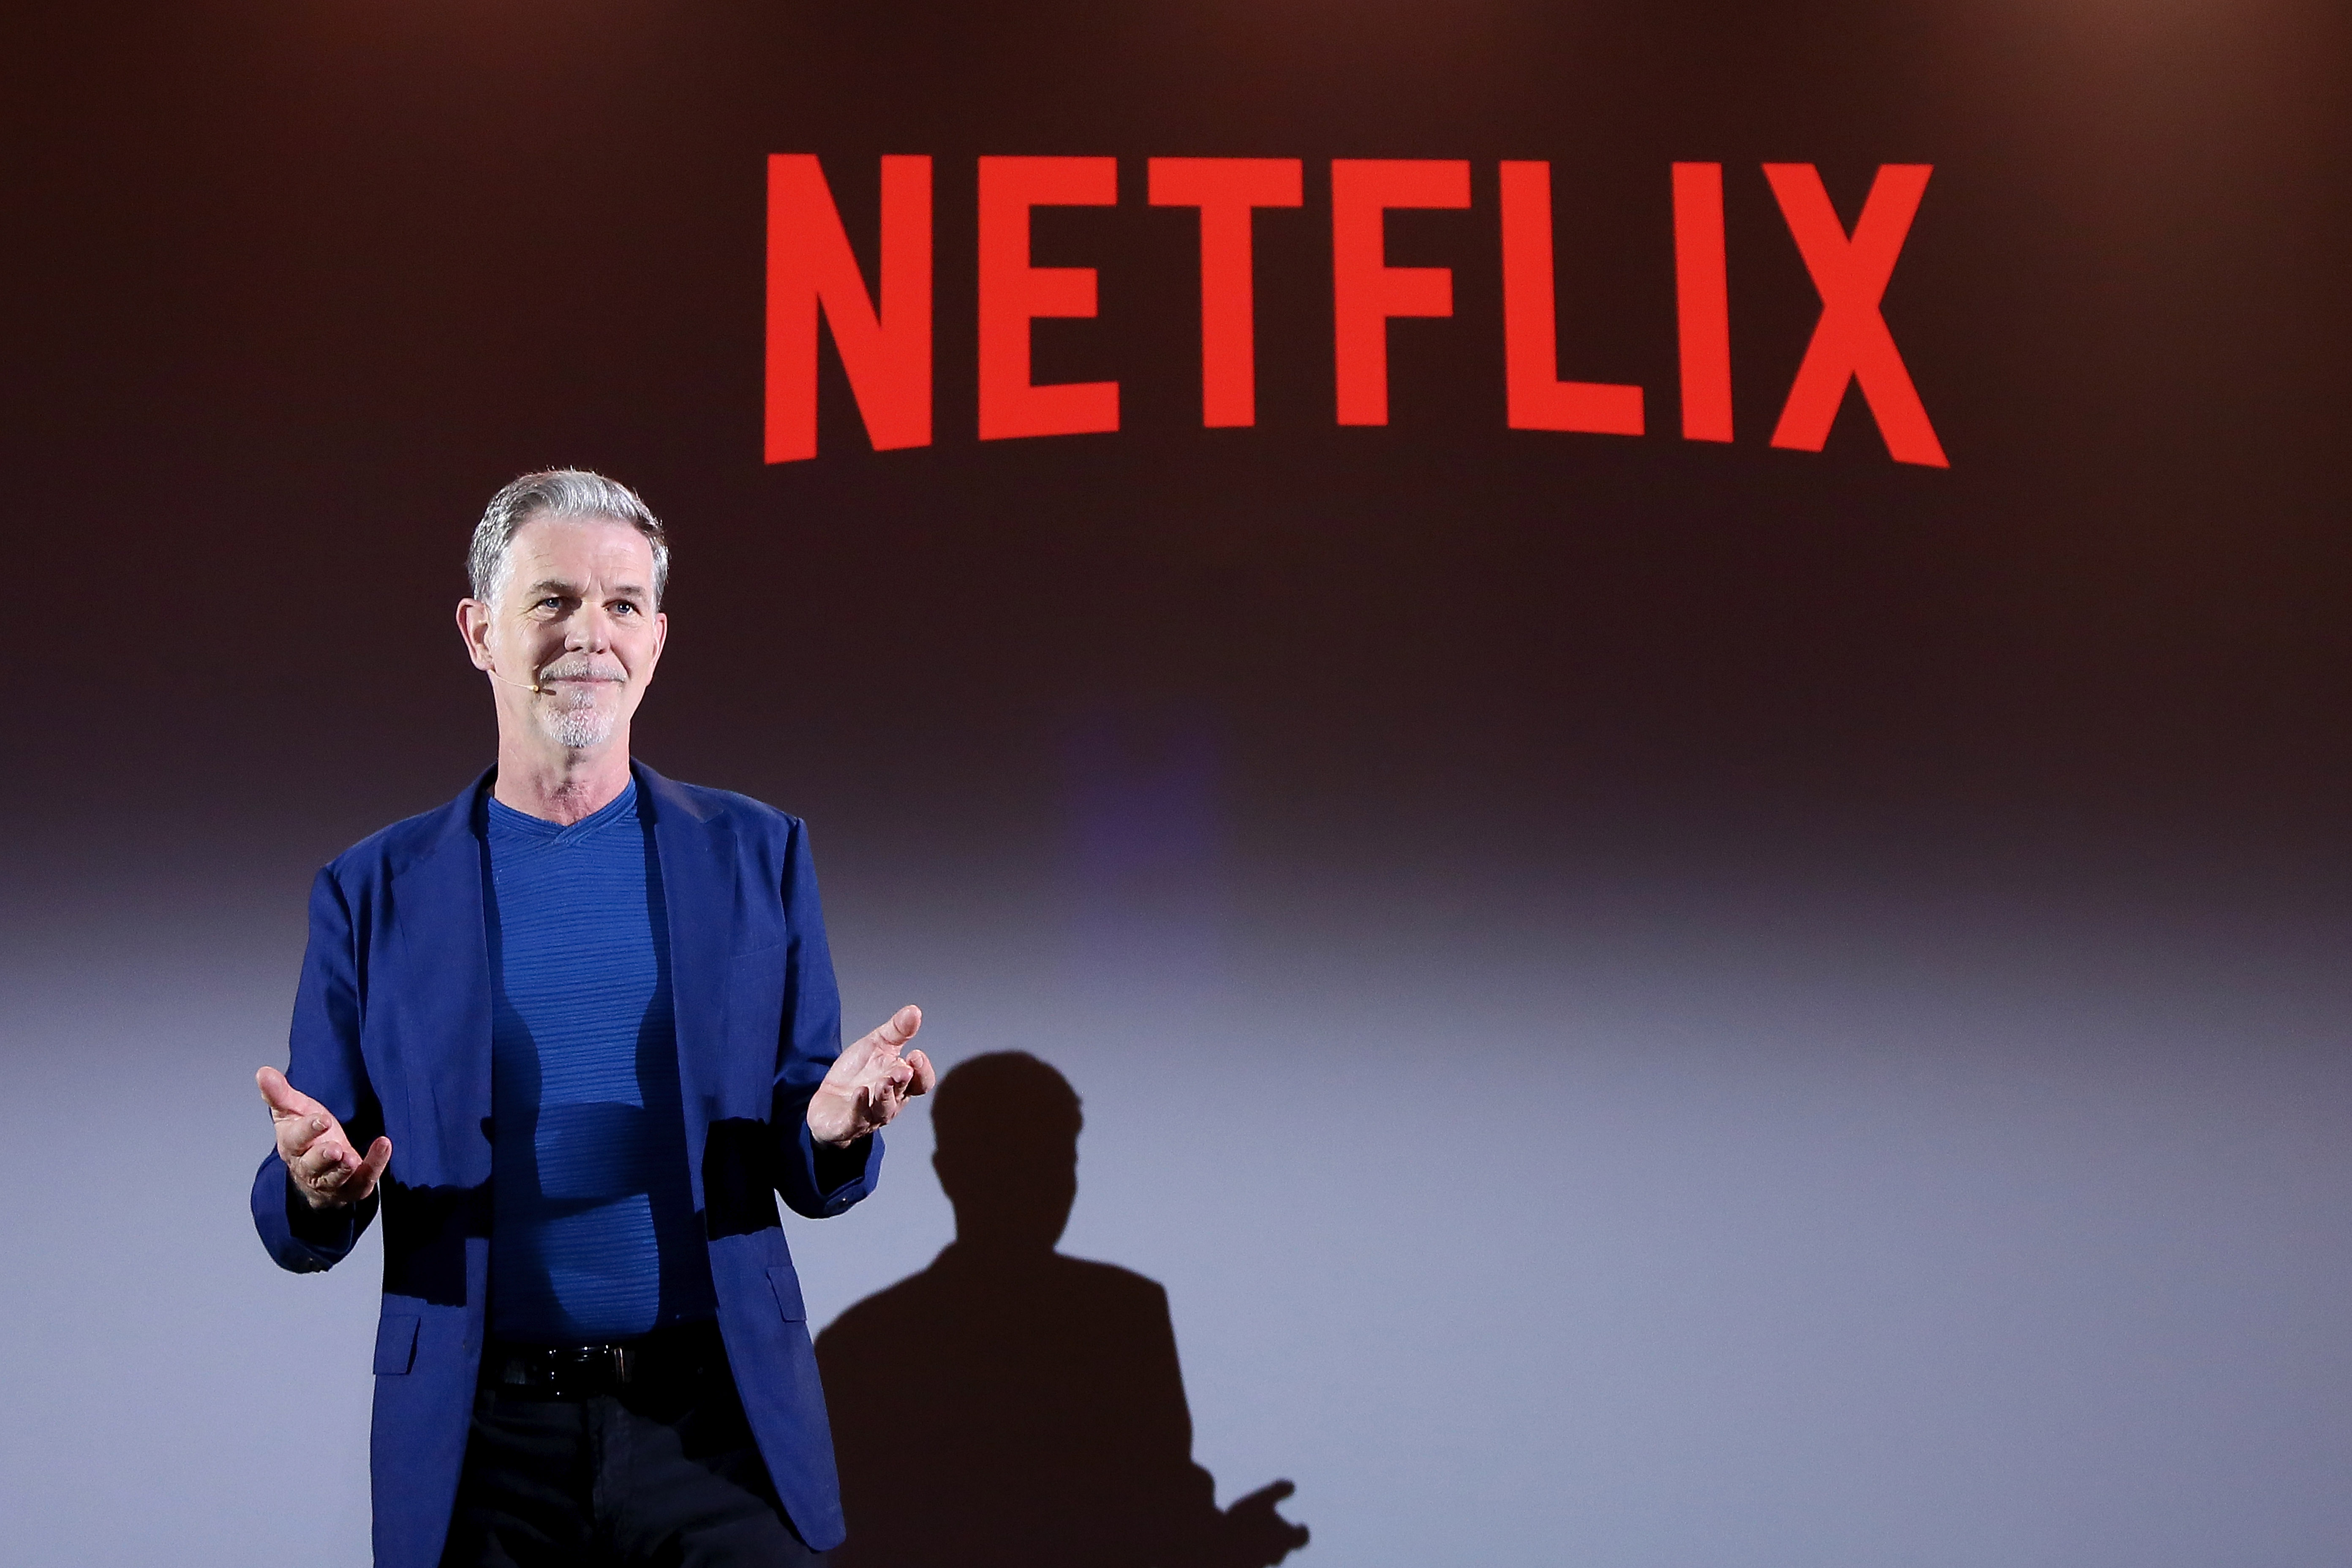 Netflix founder Reed Hastings steps down as co-CEO | TechCrunch